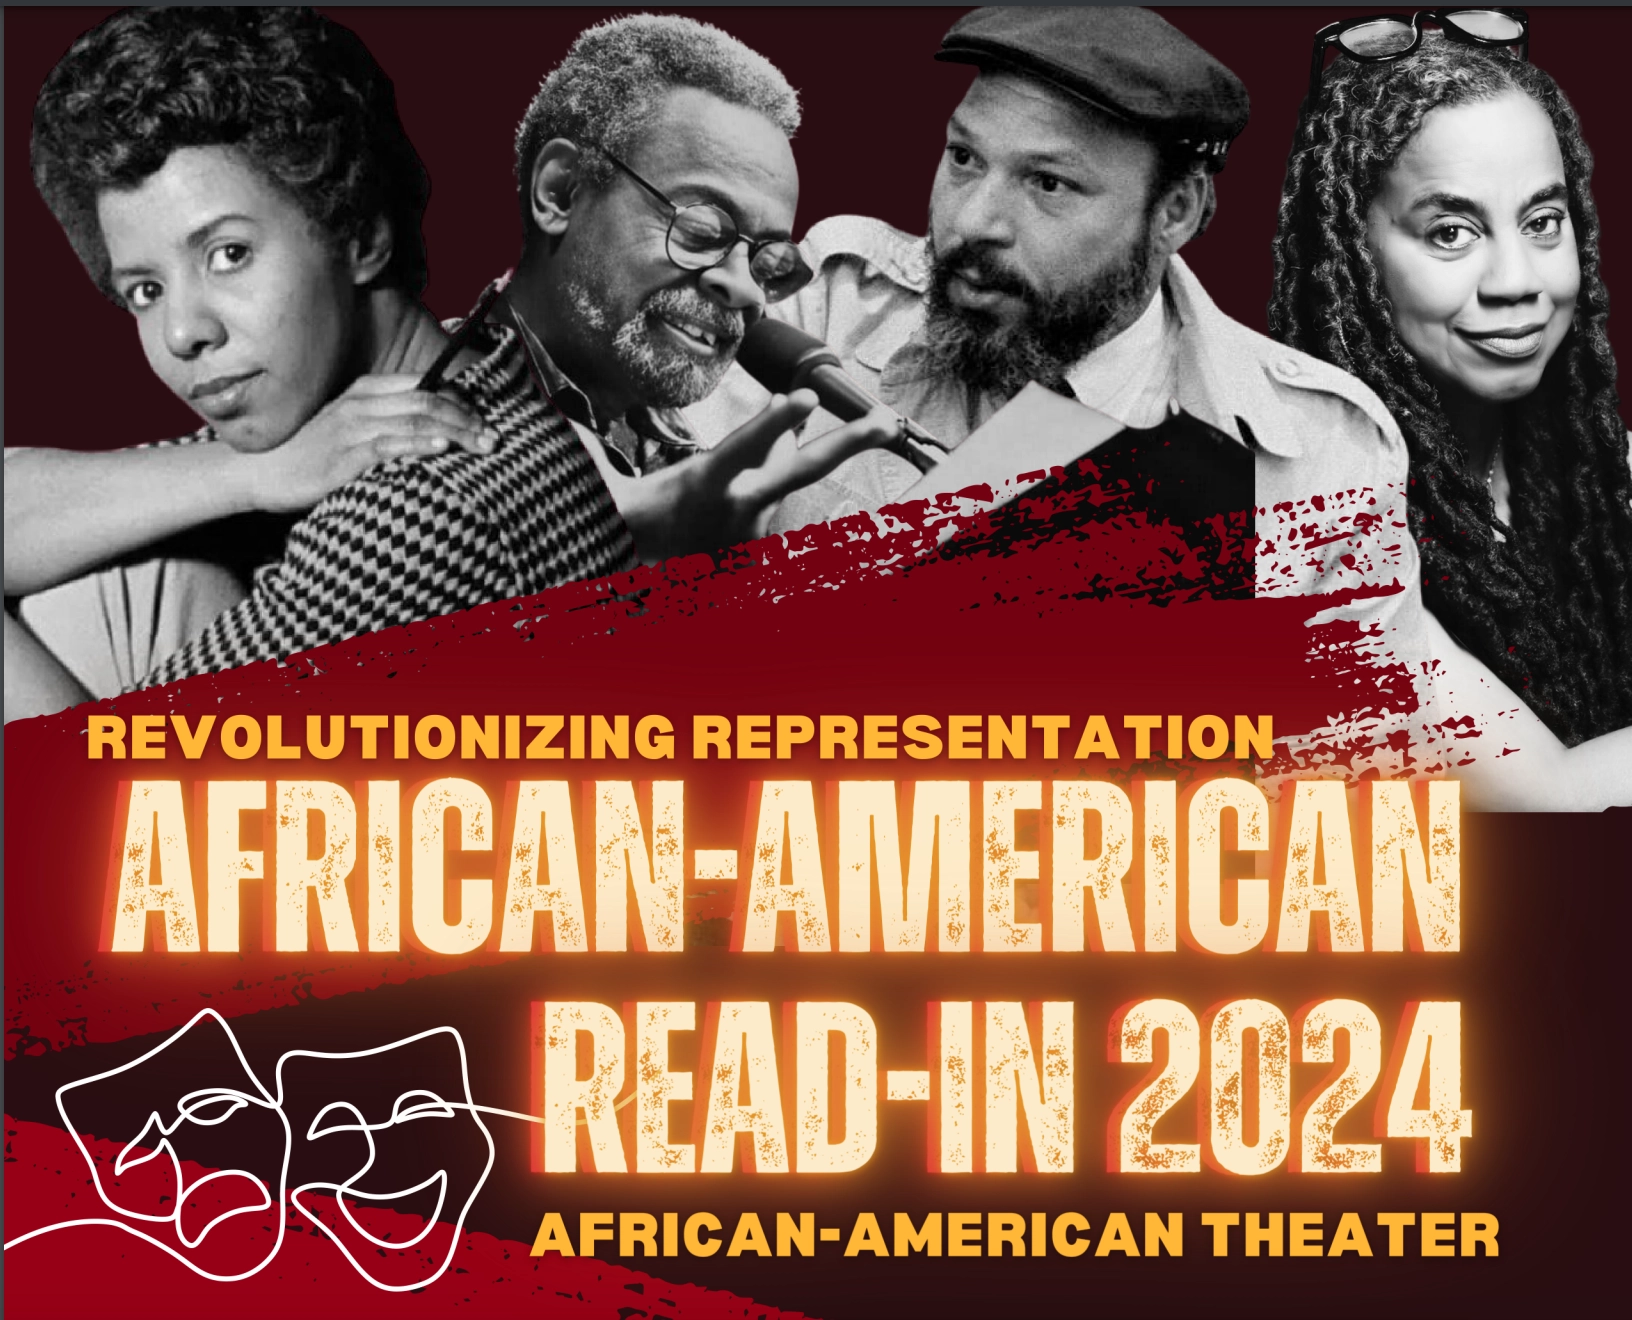 A poster promoting African-American Read-In 2024.